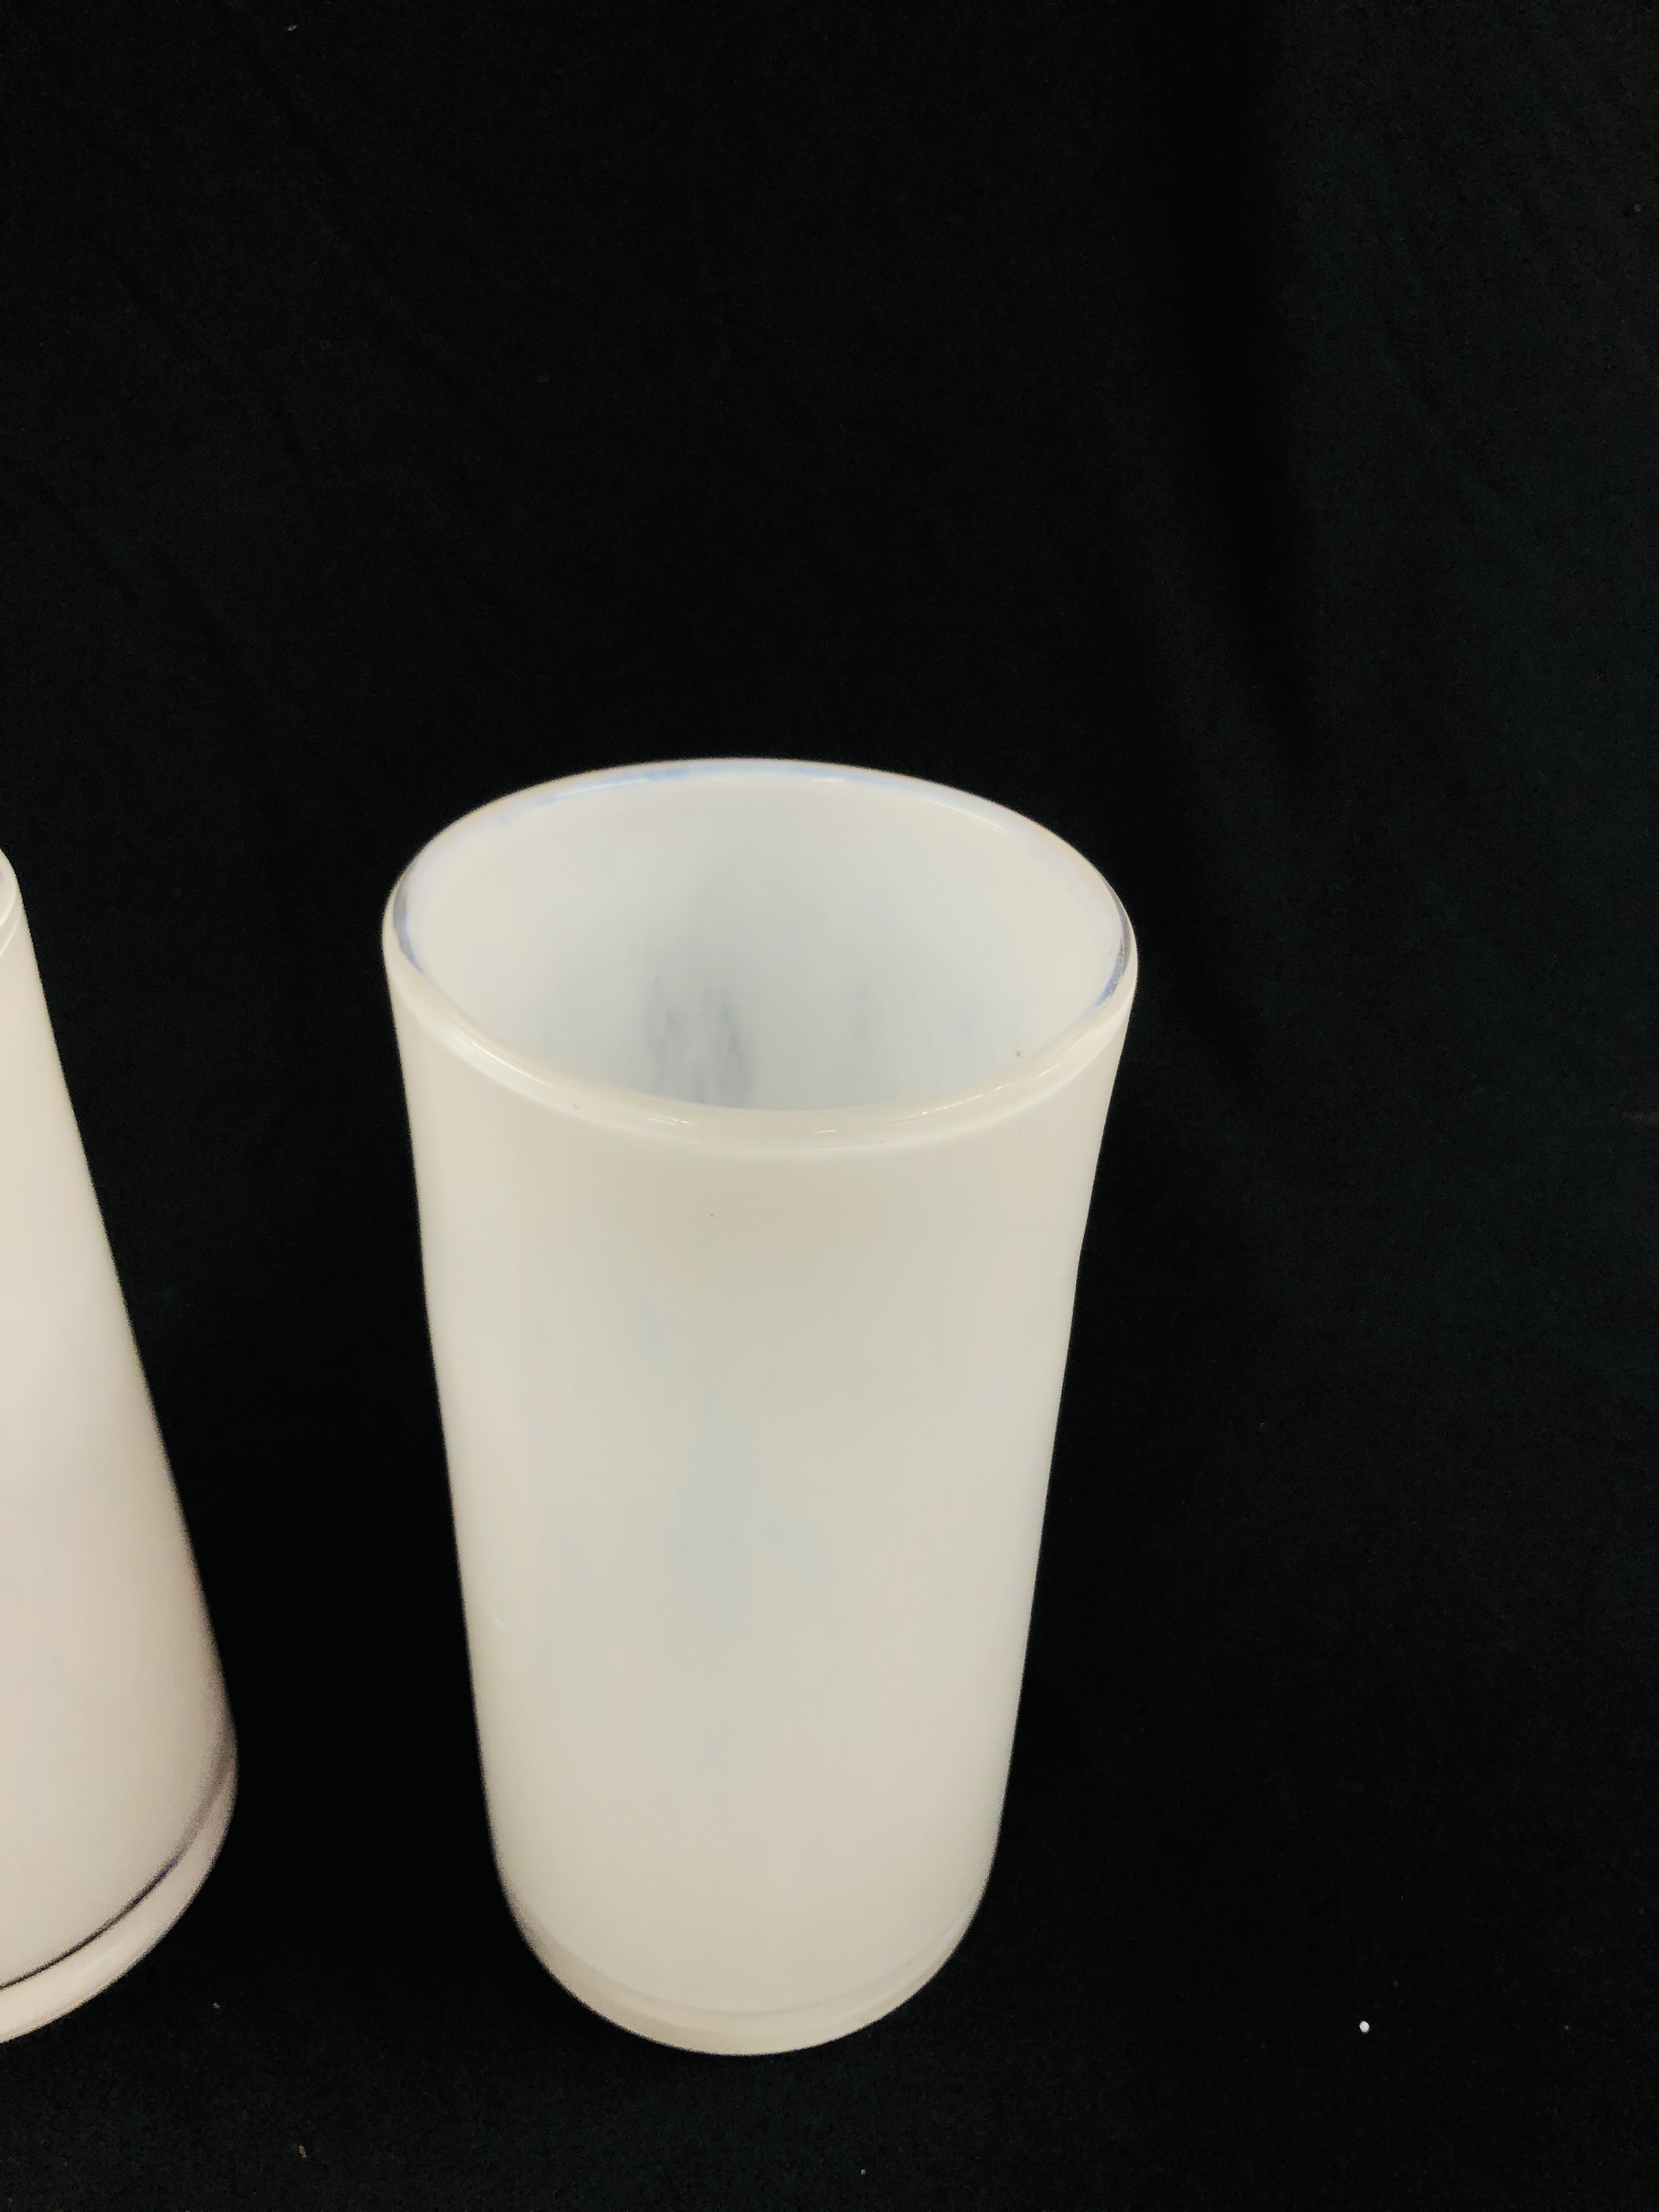 A PAIR OF WHITE ART GLASS STUDIO VASES H 24CM. ALONG WITH A SIMILAR CRANBERRY FINISH EXAMPLE H 25CM. - Image 2 of 4